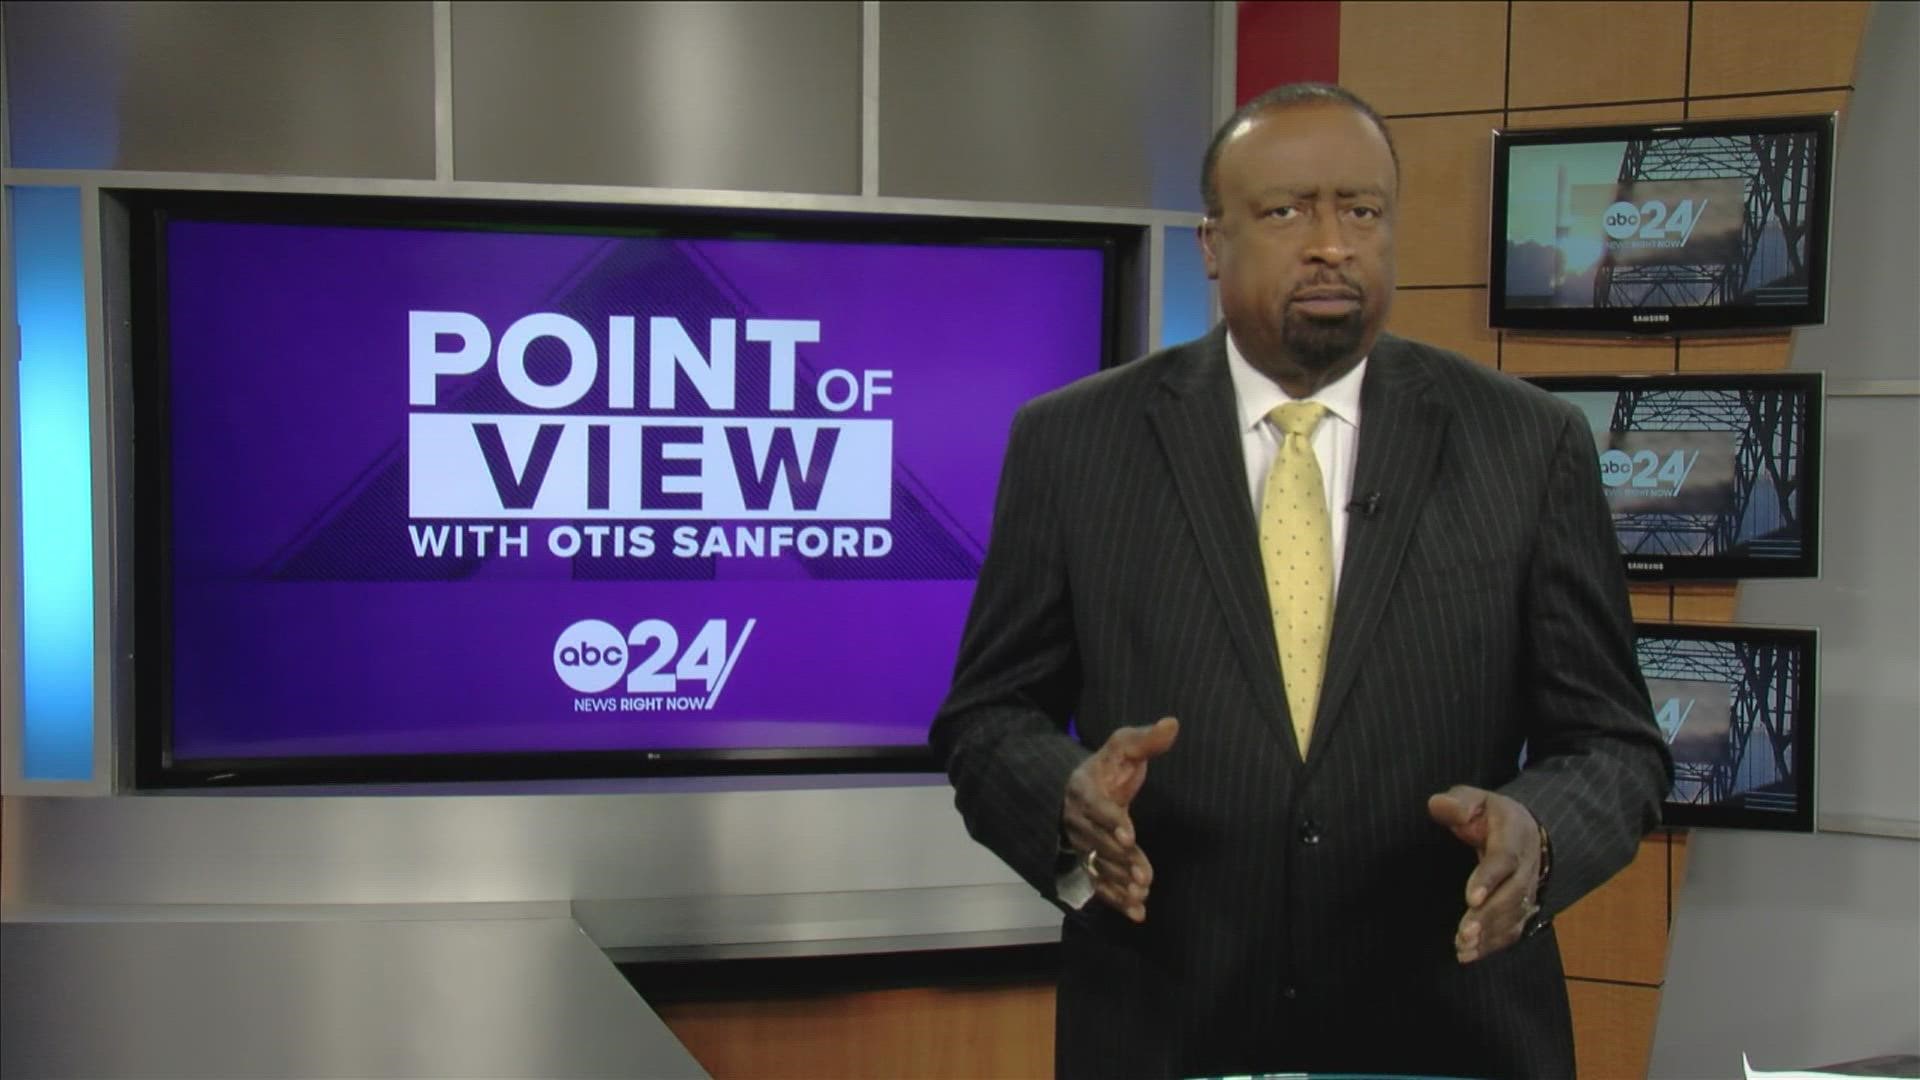 ABC 24 political analyst and commentator Otis Sanford shared his point of view on how violent crime affects small businesses in Memphis.